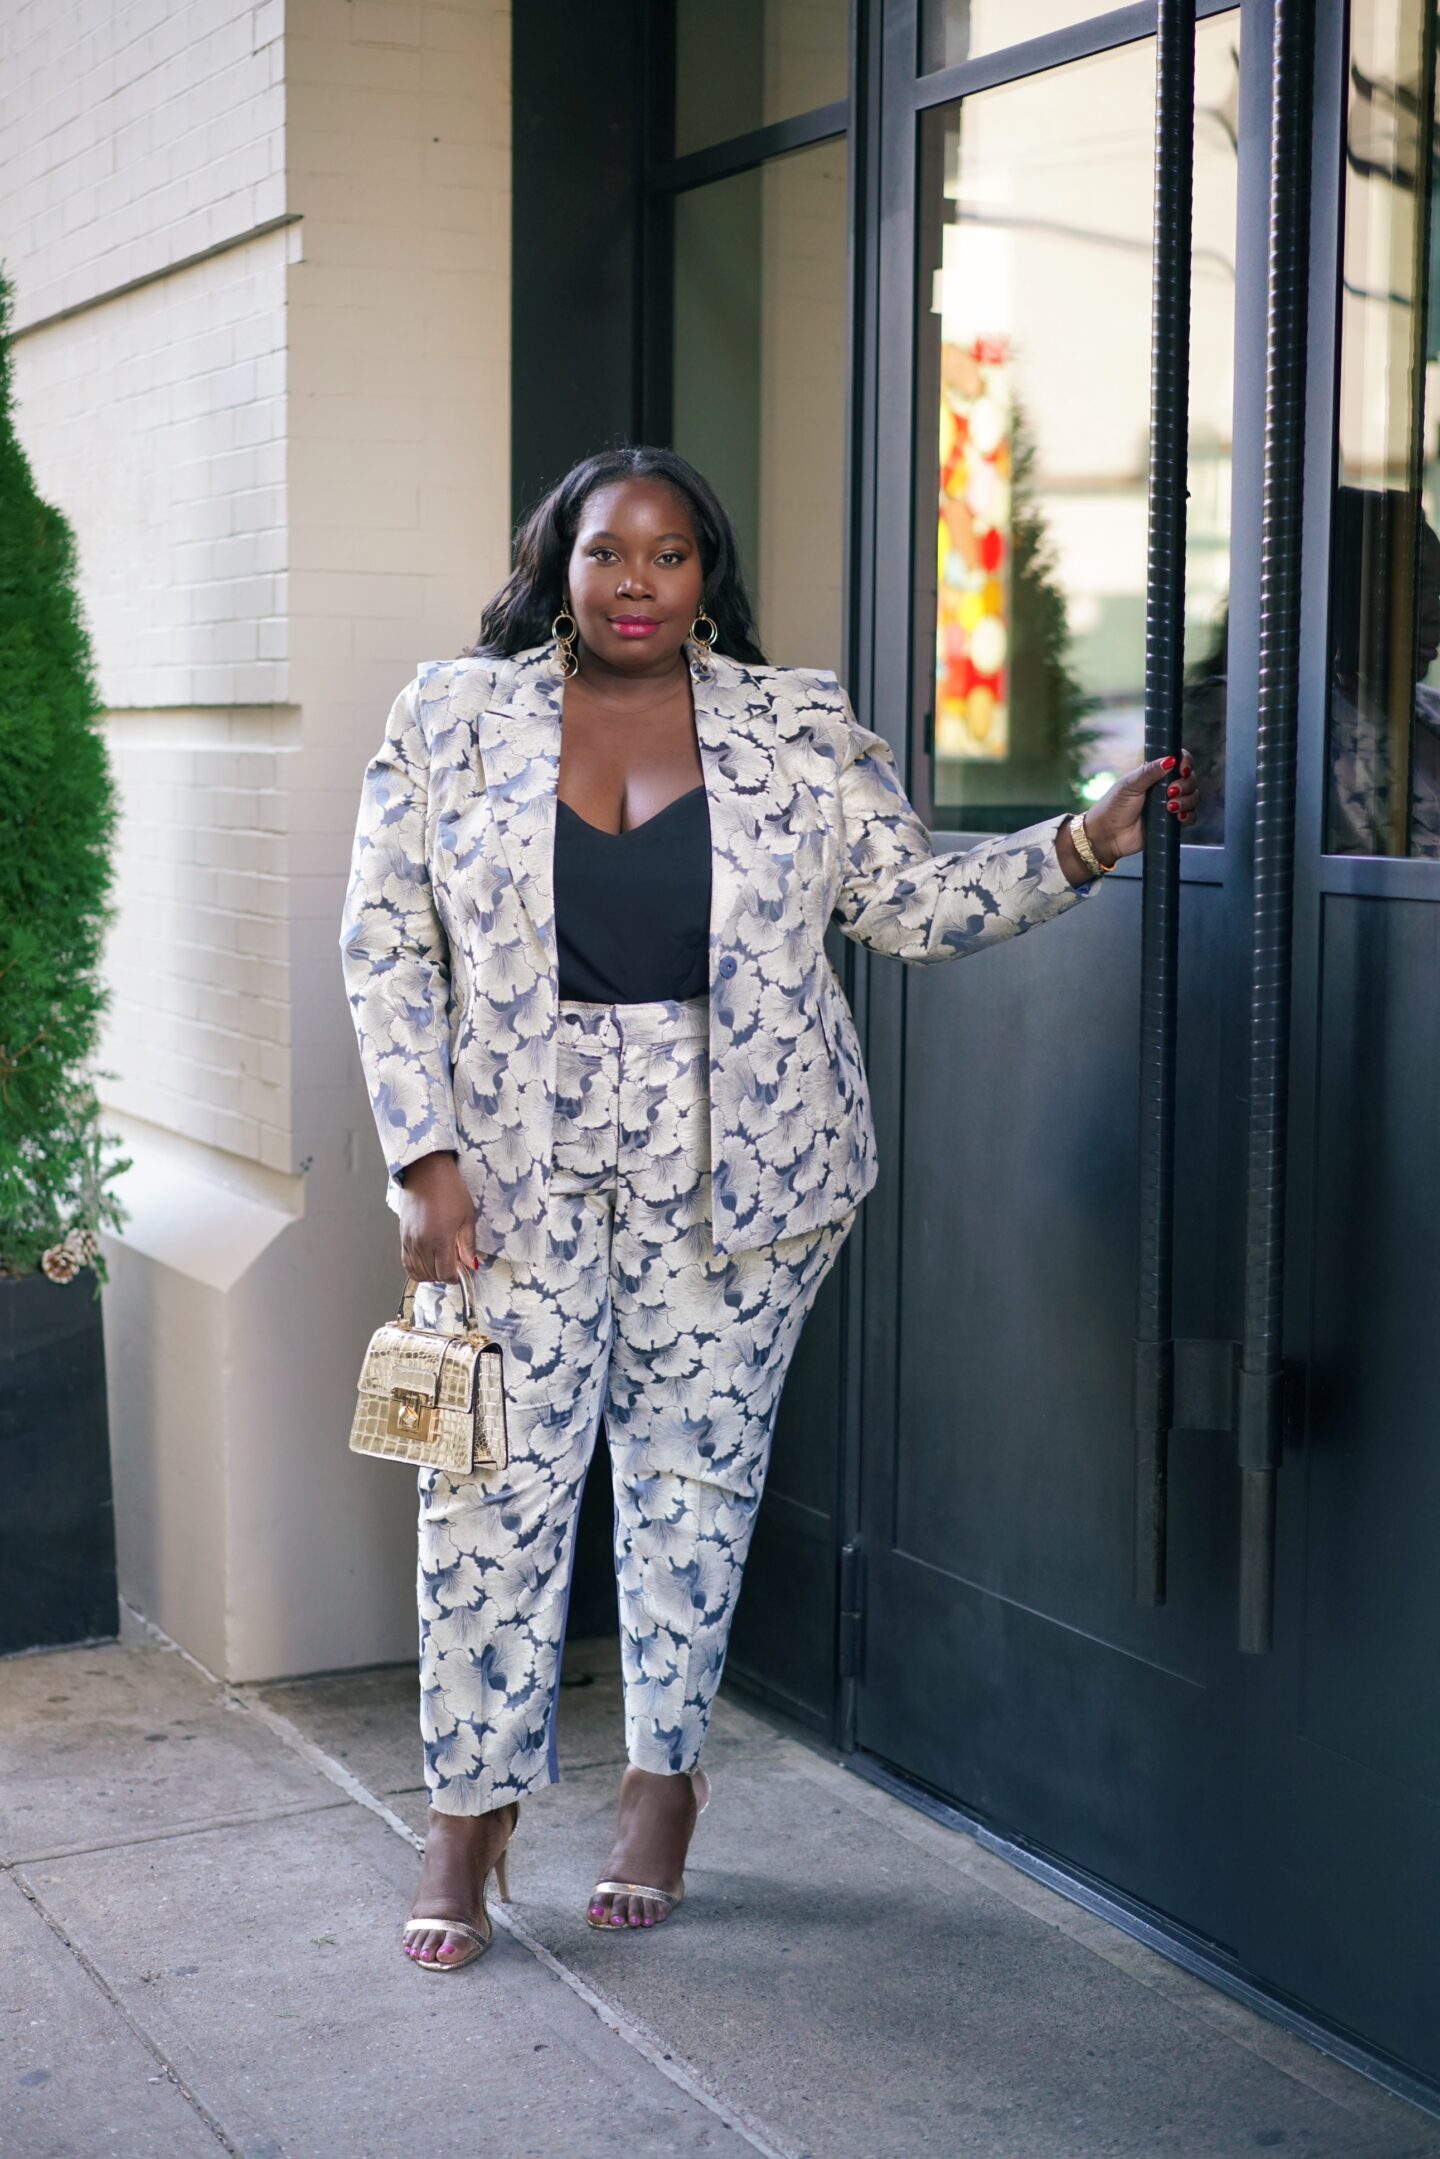 A matching suit is a chic option for a new years eve outfit or for a special event look. This plus size suit is from eloquii and has a blue and gold color combination.